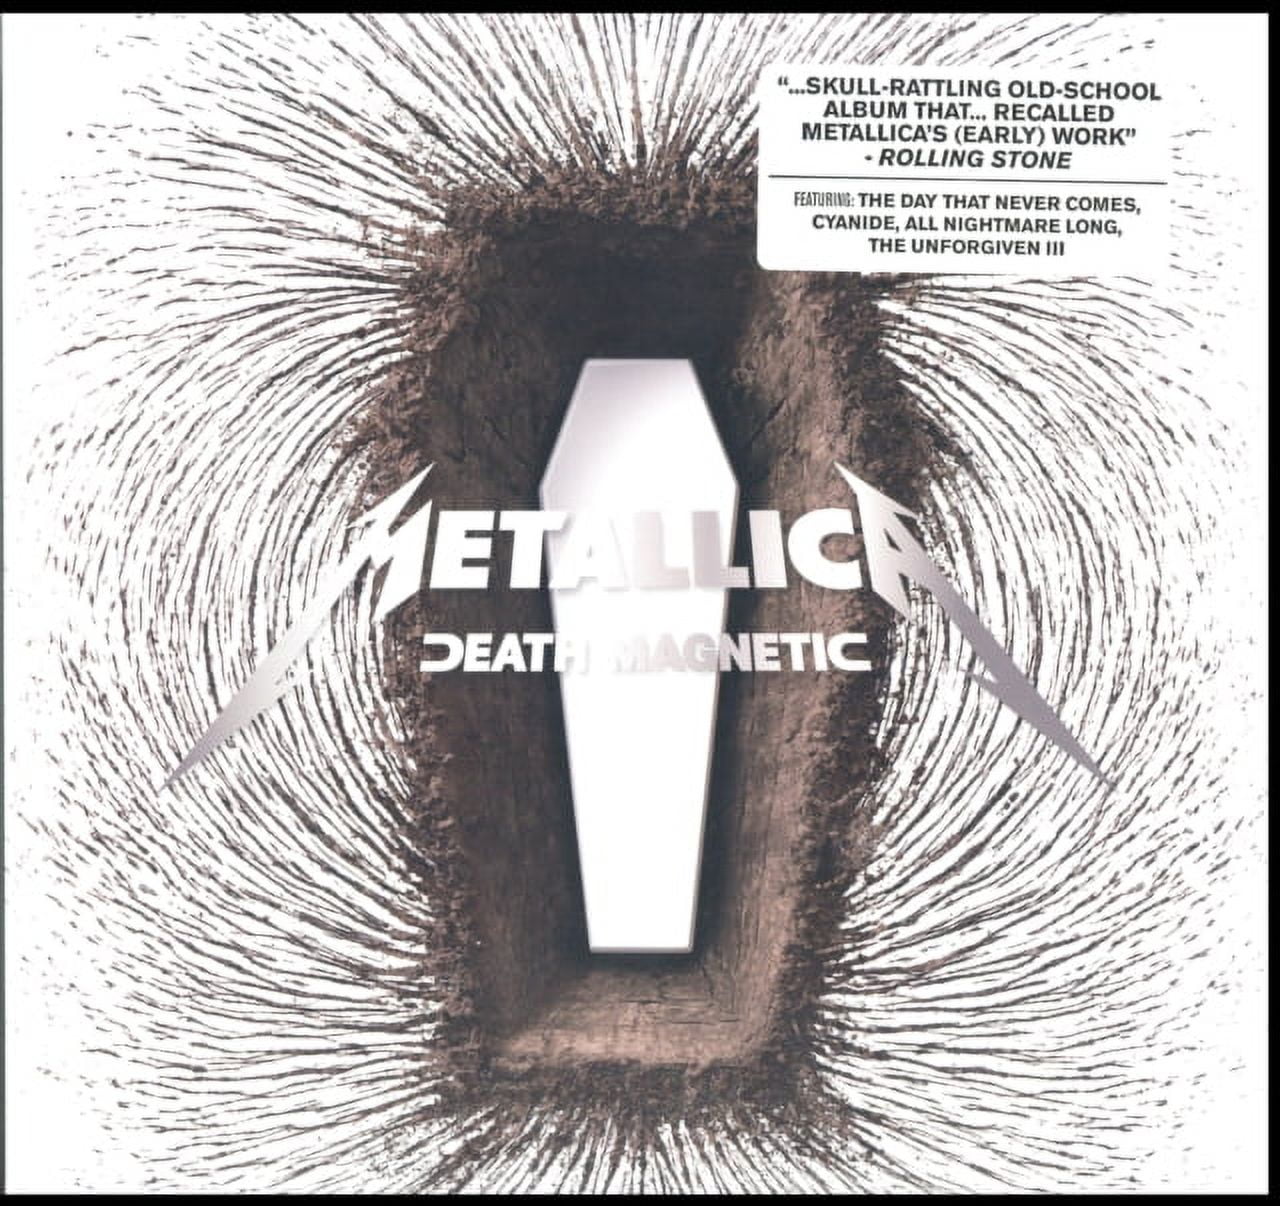 my copy of death magnetic on vinyl is misprinted with two side 3s. any idea  if it's worth anything? : r/Metallica